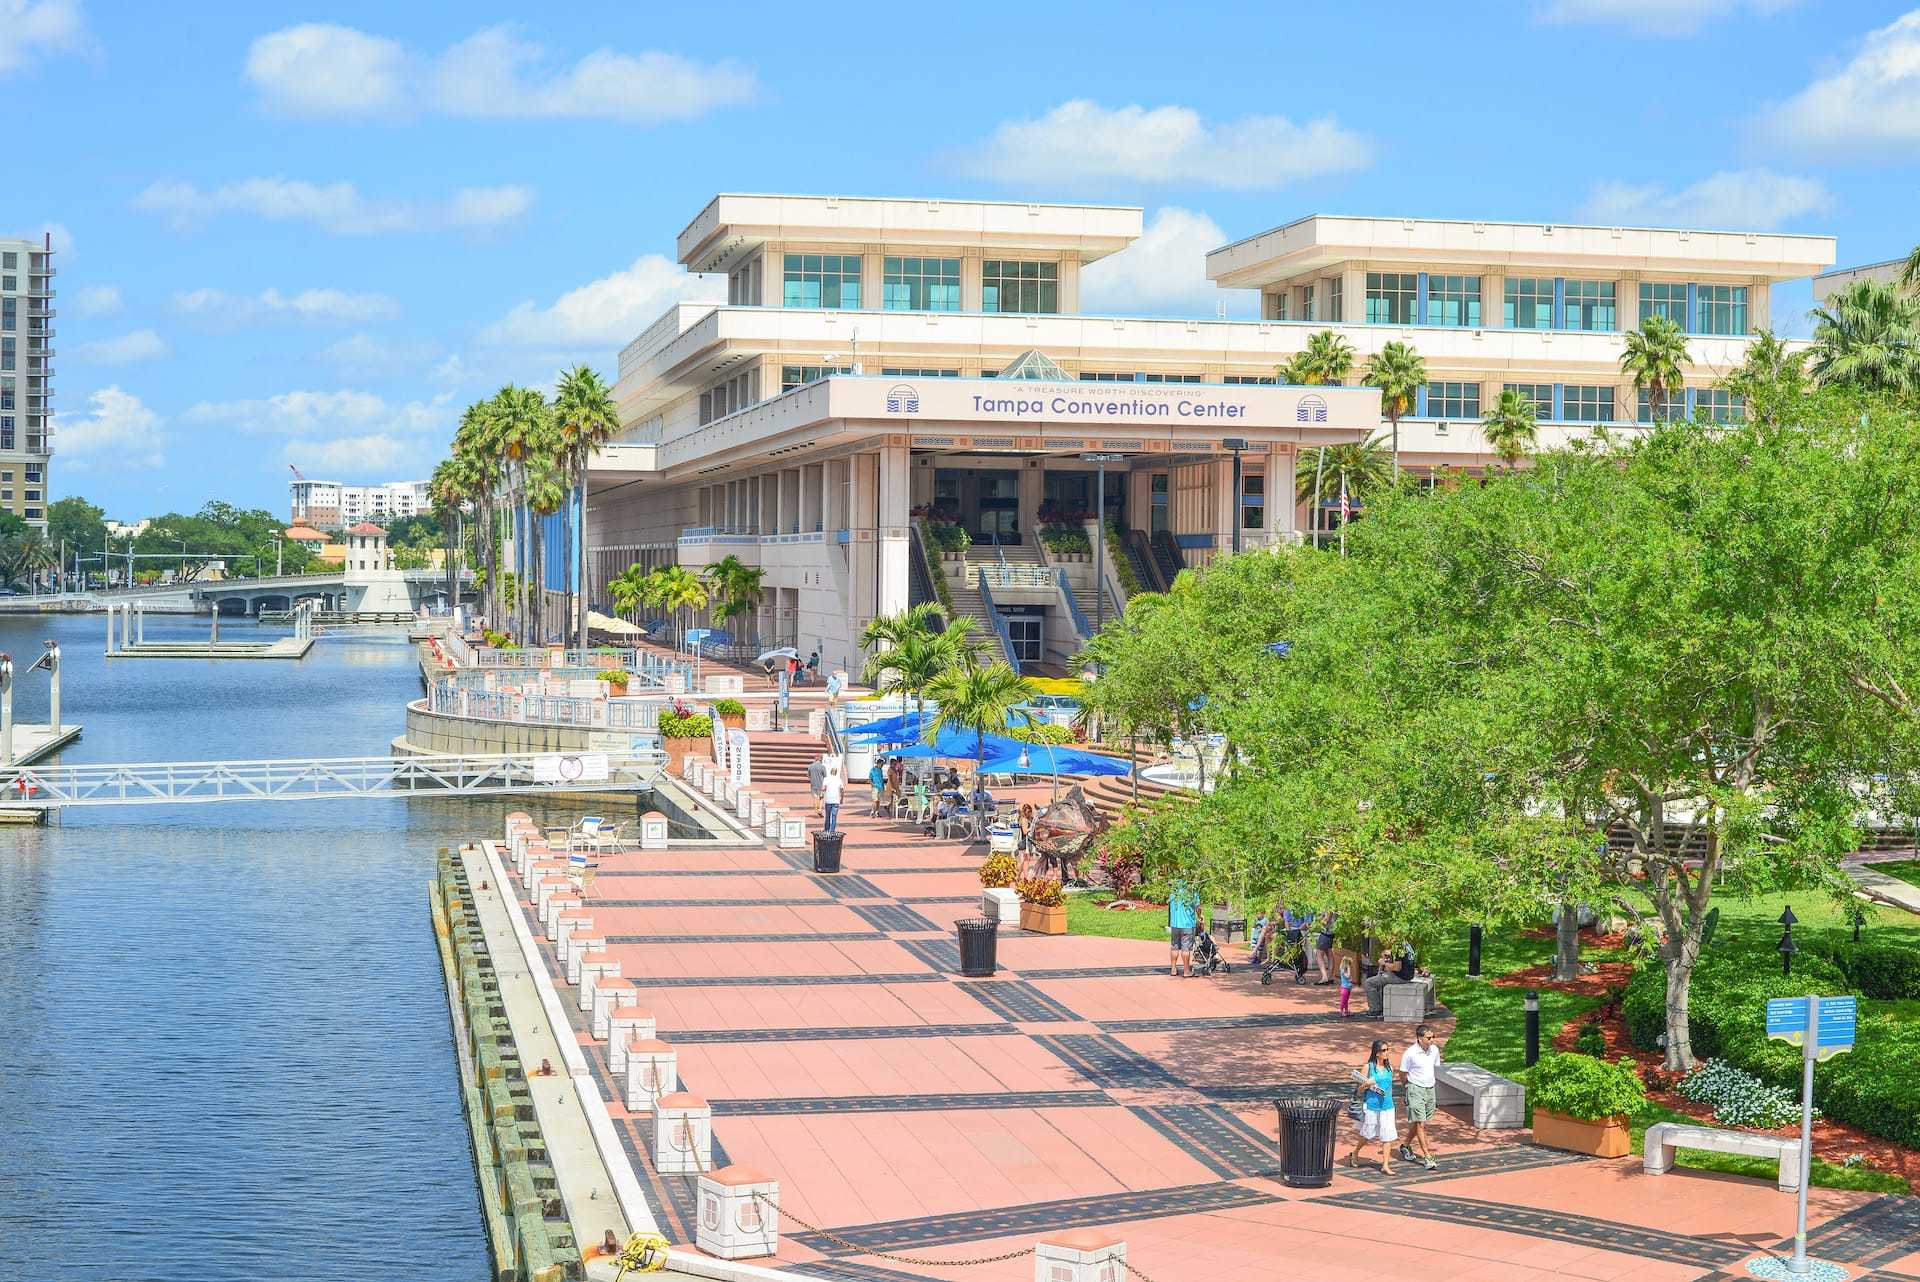 Tampa Real Estate Market: 2022 Stats & Trends to Know